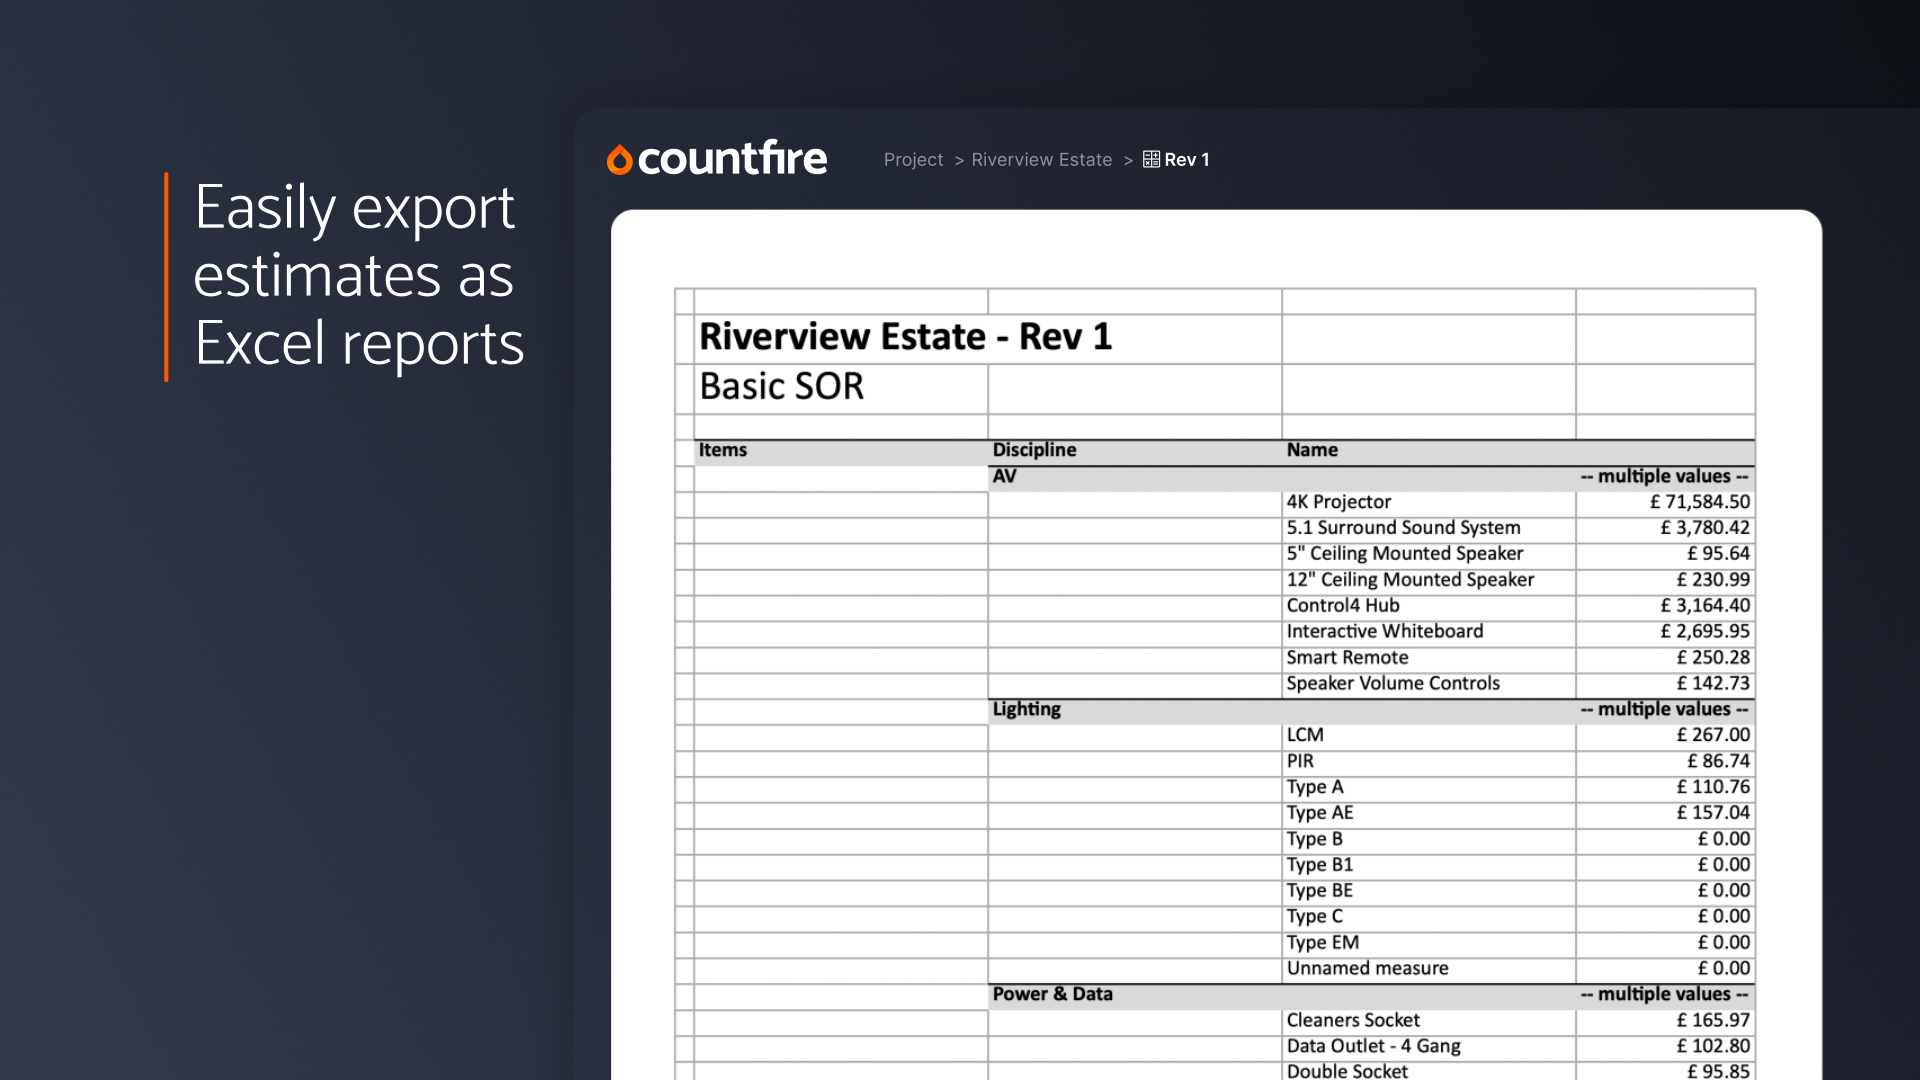 Easily export estimates as Excel reports